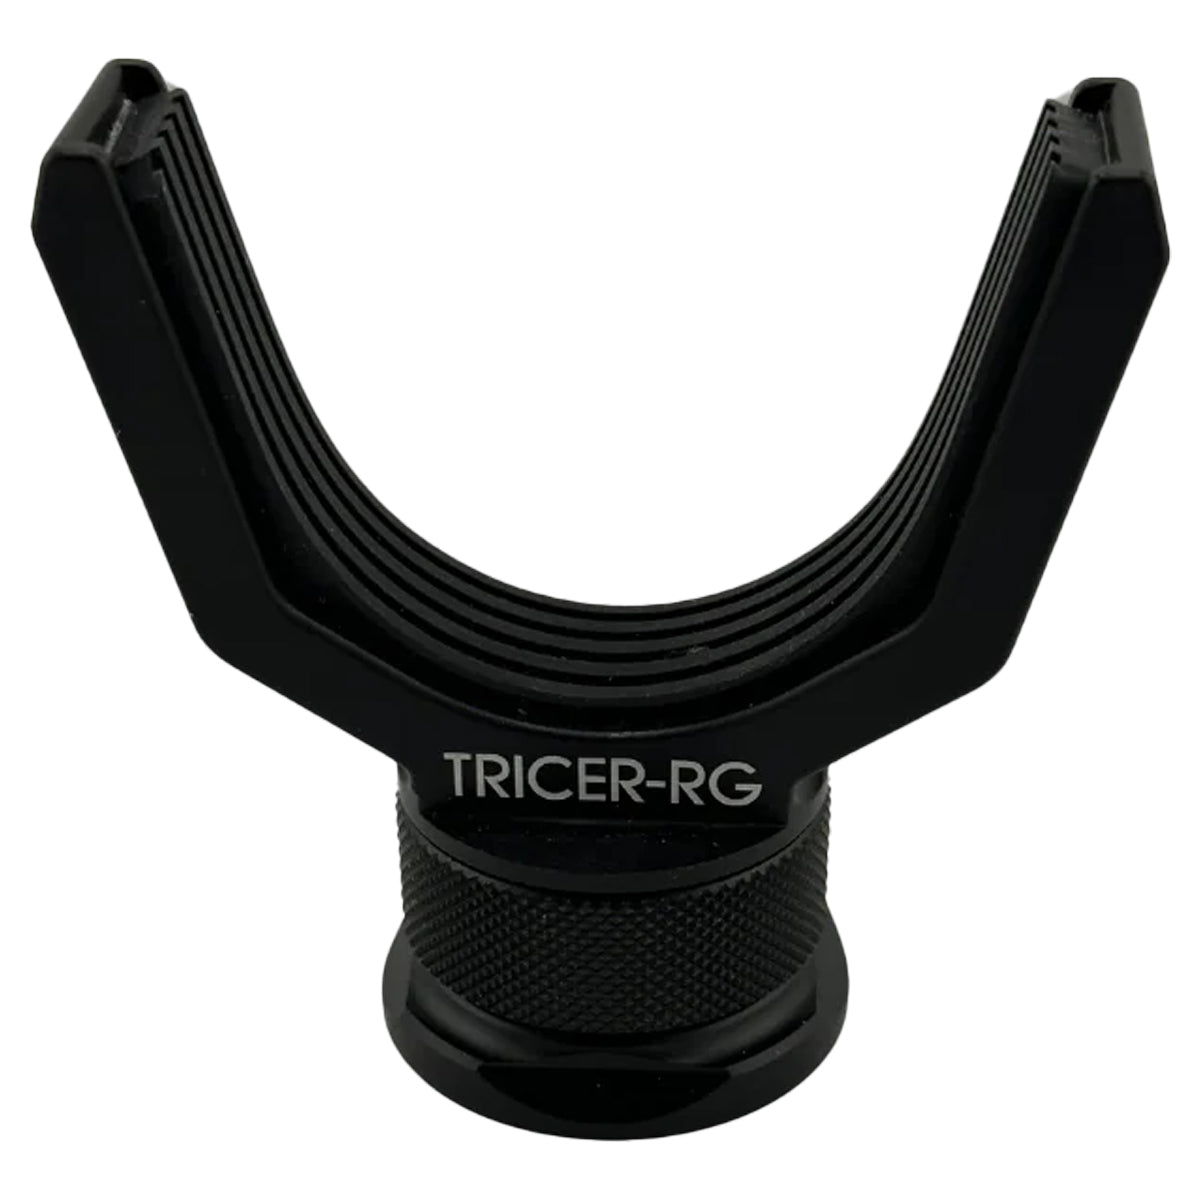 Tricer RG Shooting Rest in  by GOHUNT | Tricer - GOHUNT Shop